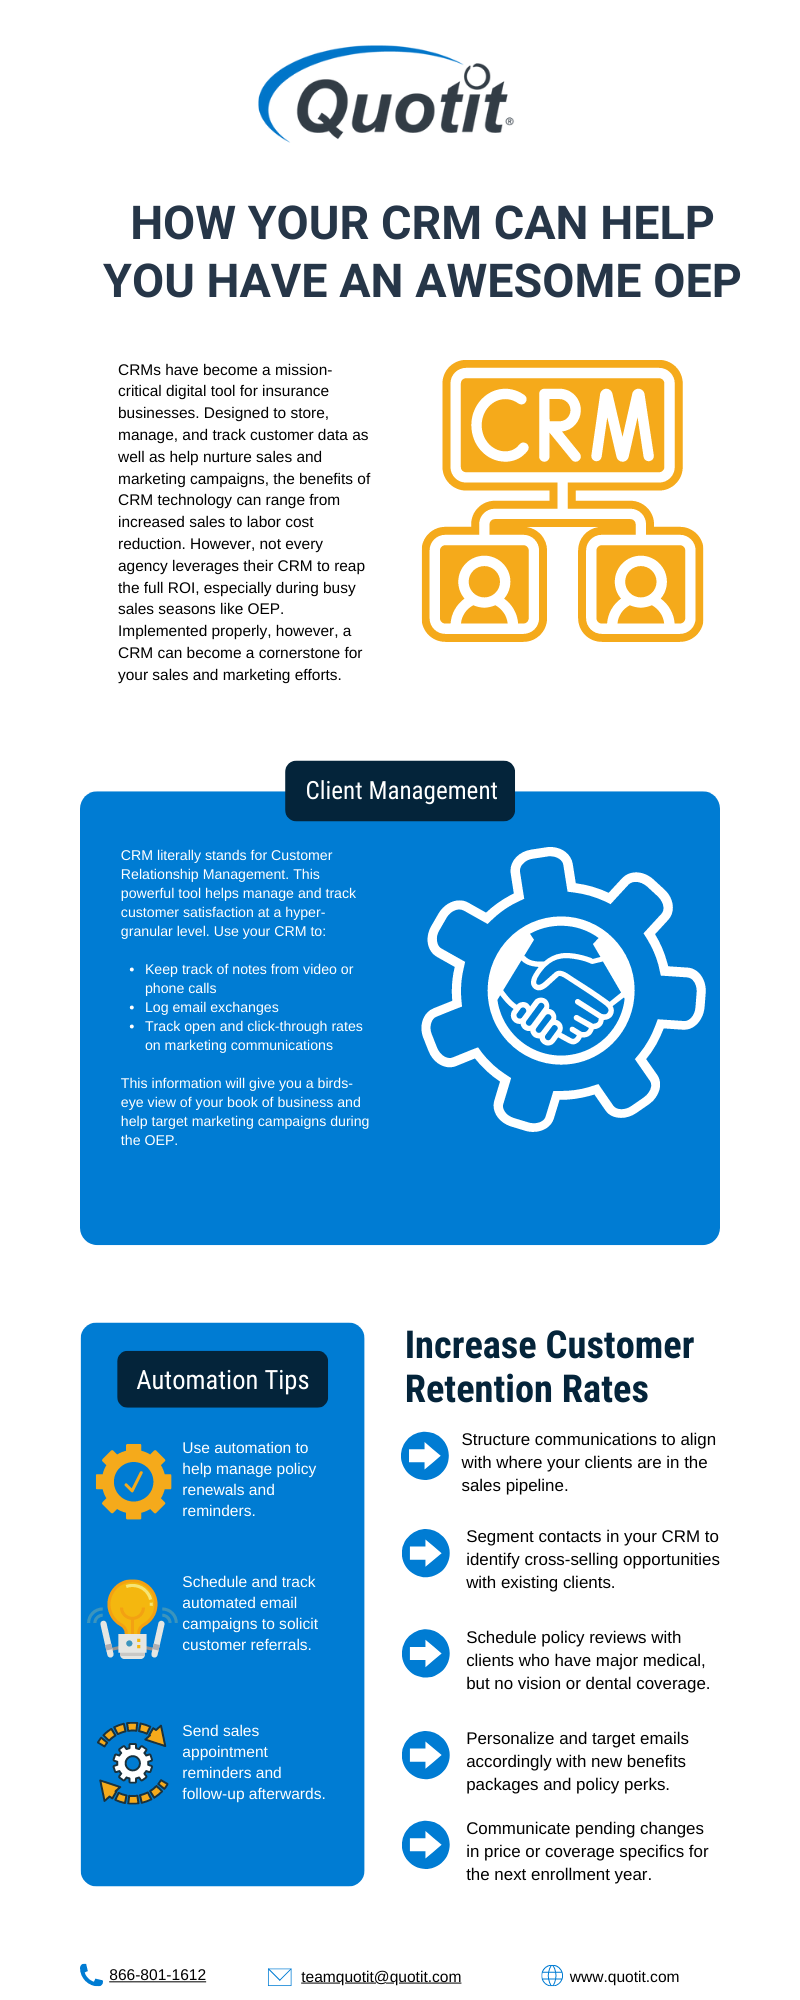 9 Ways a CRM Can Help You Have an Awesome OEP4 (2)